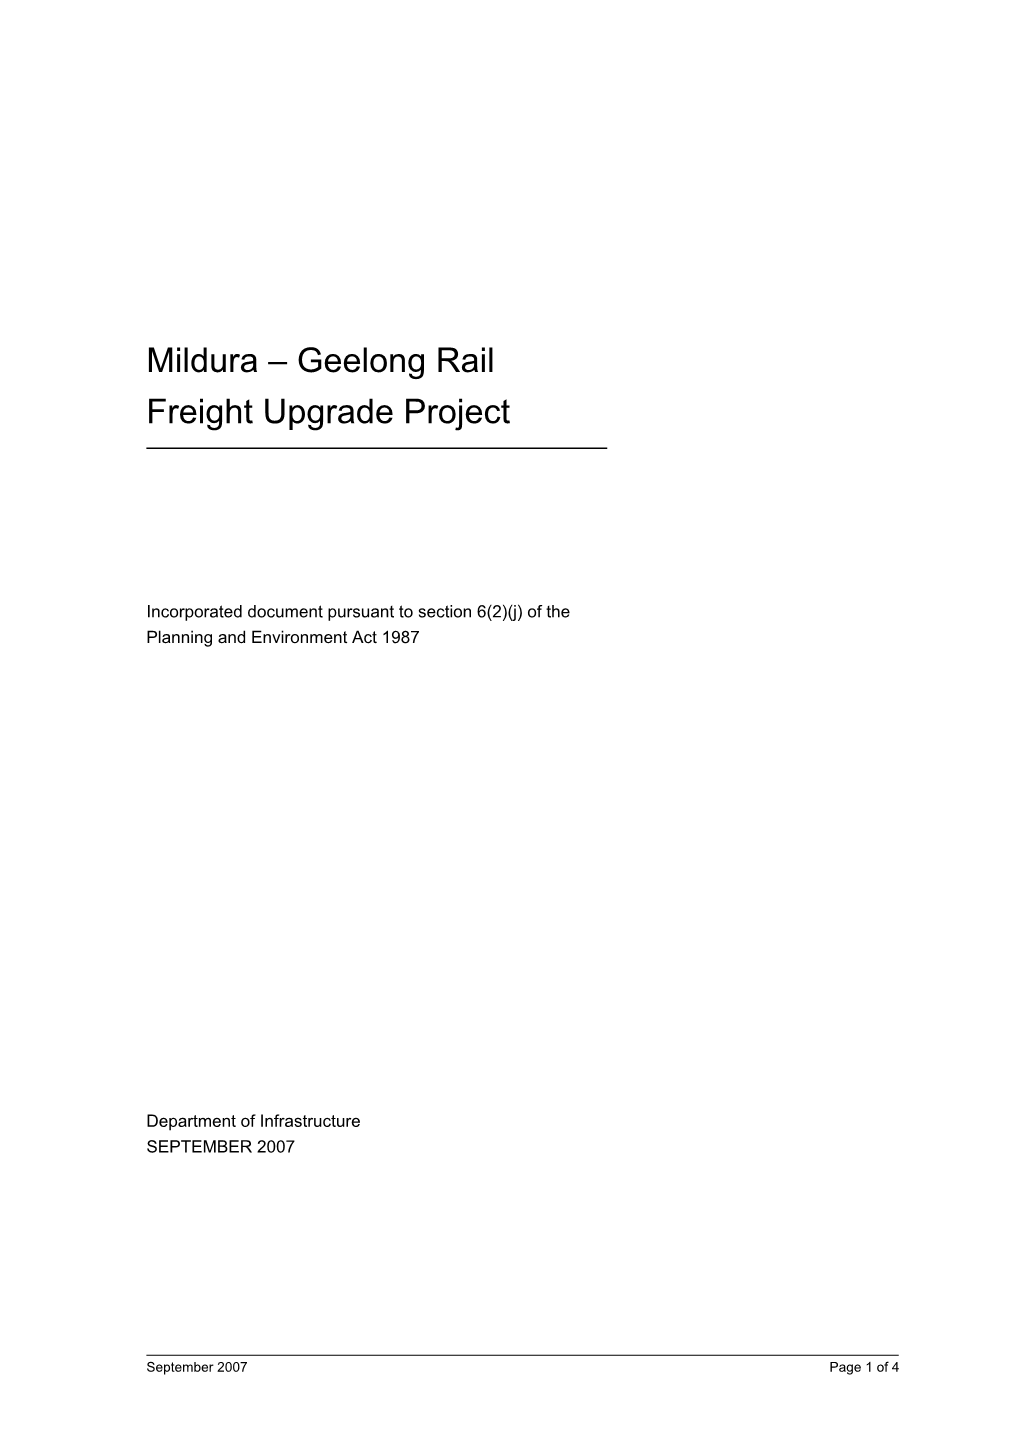 Geelong Rail Freight Upgrade Project